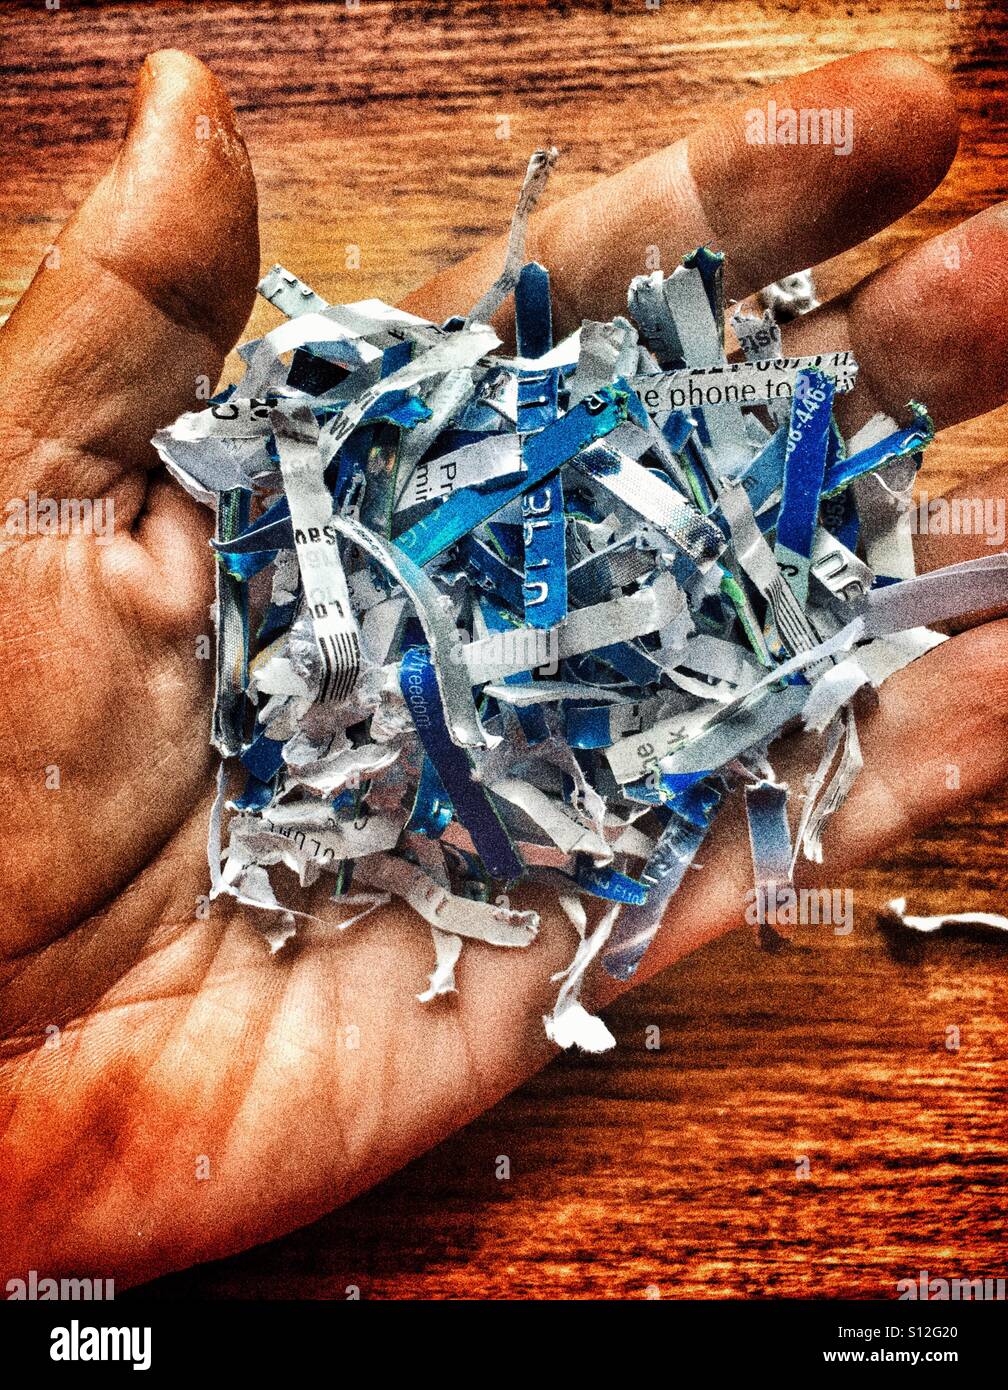 Man's hand holding a pile of shredded credit cards Stock Photo